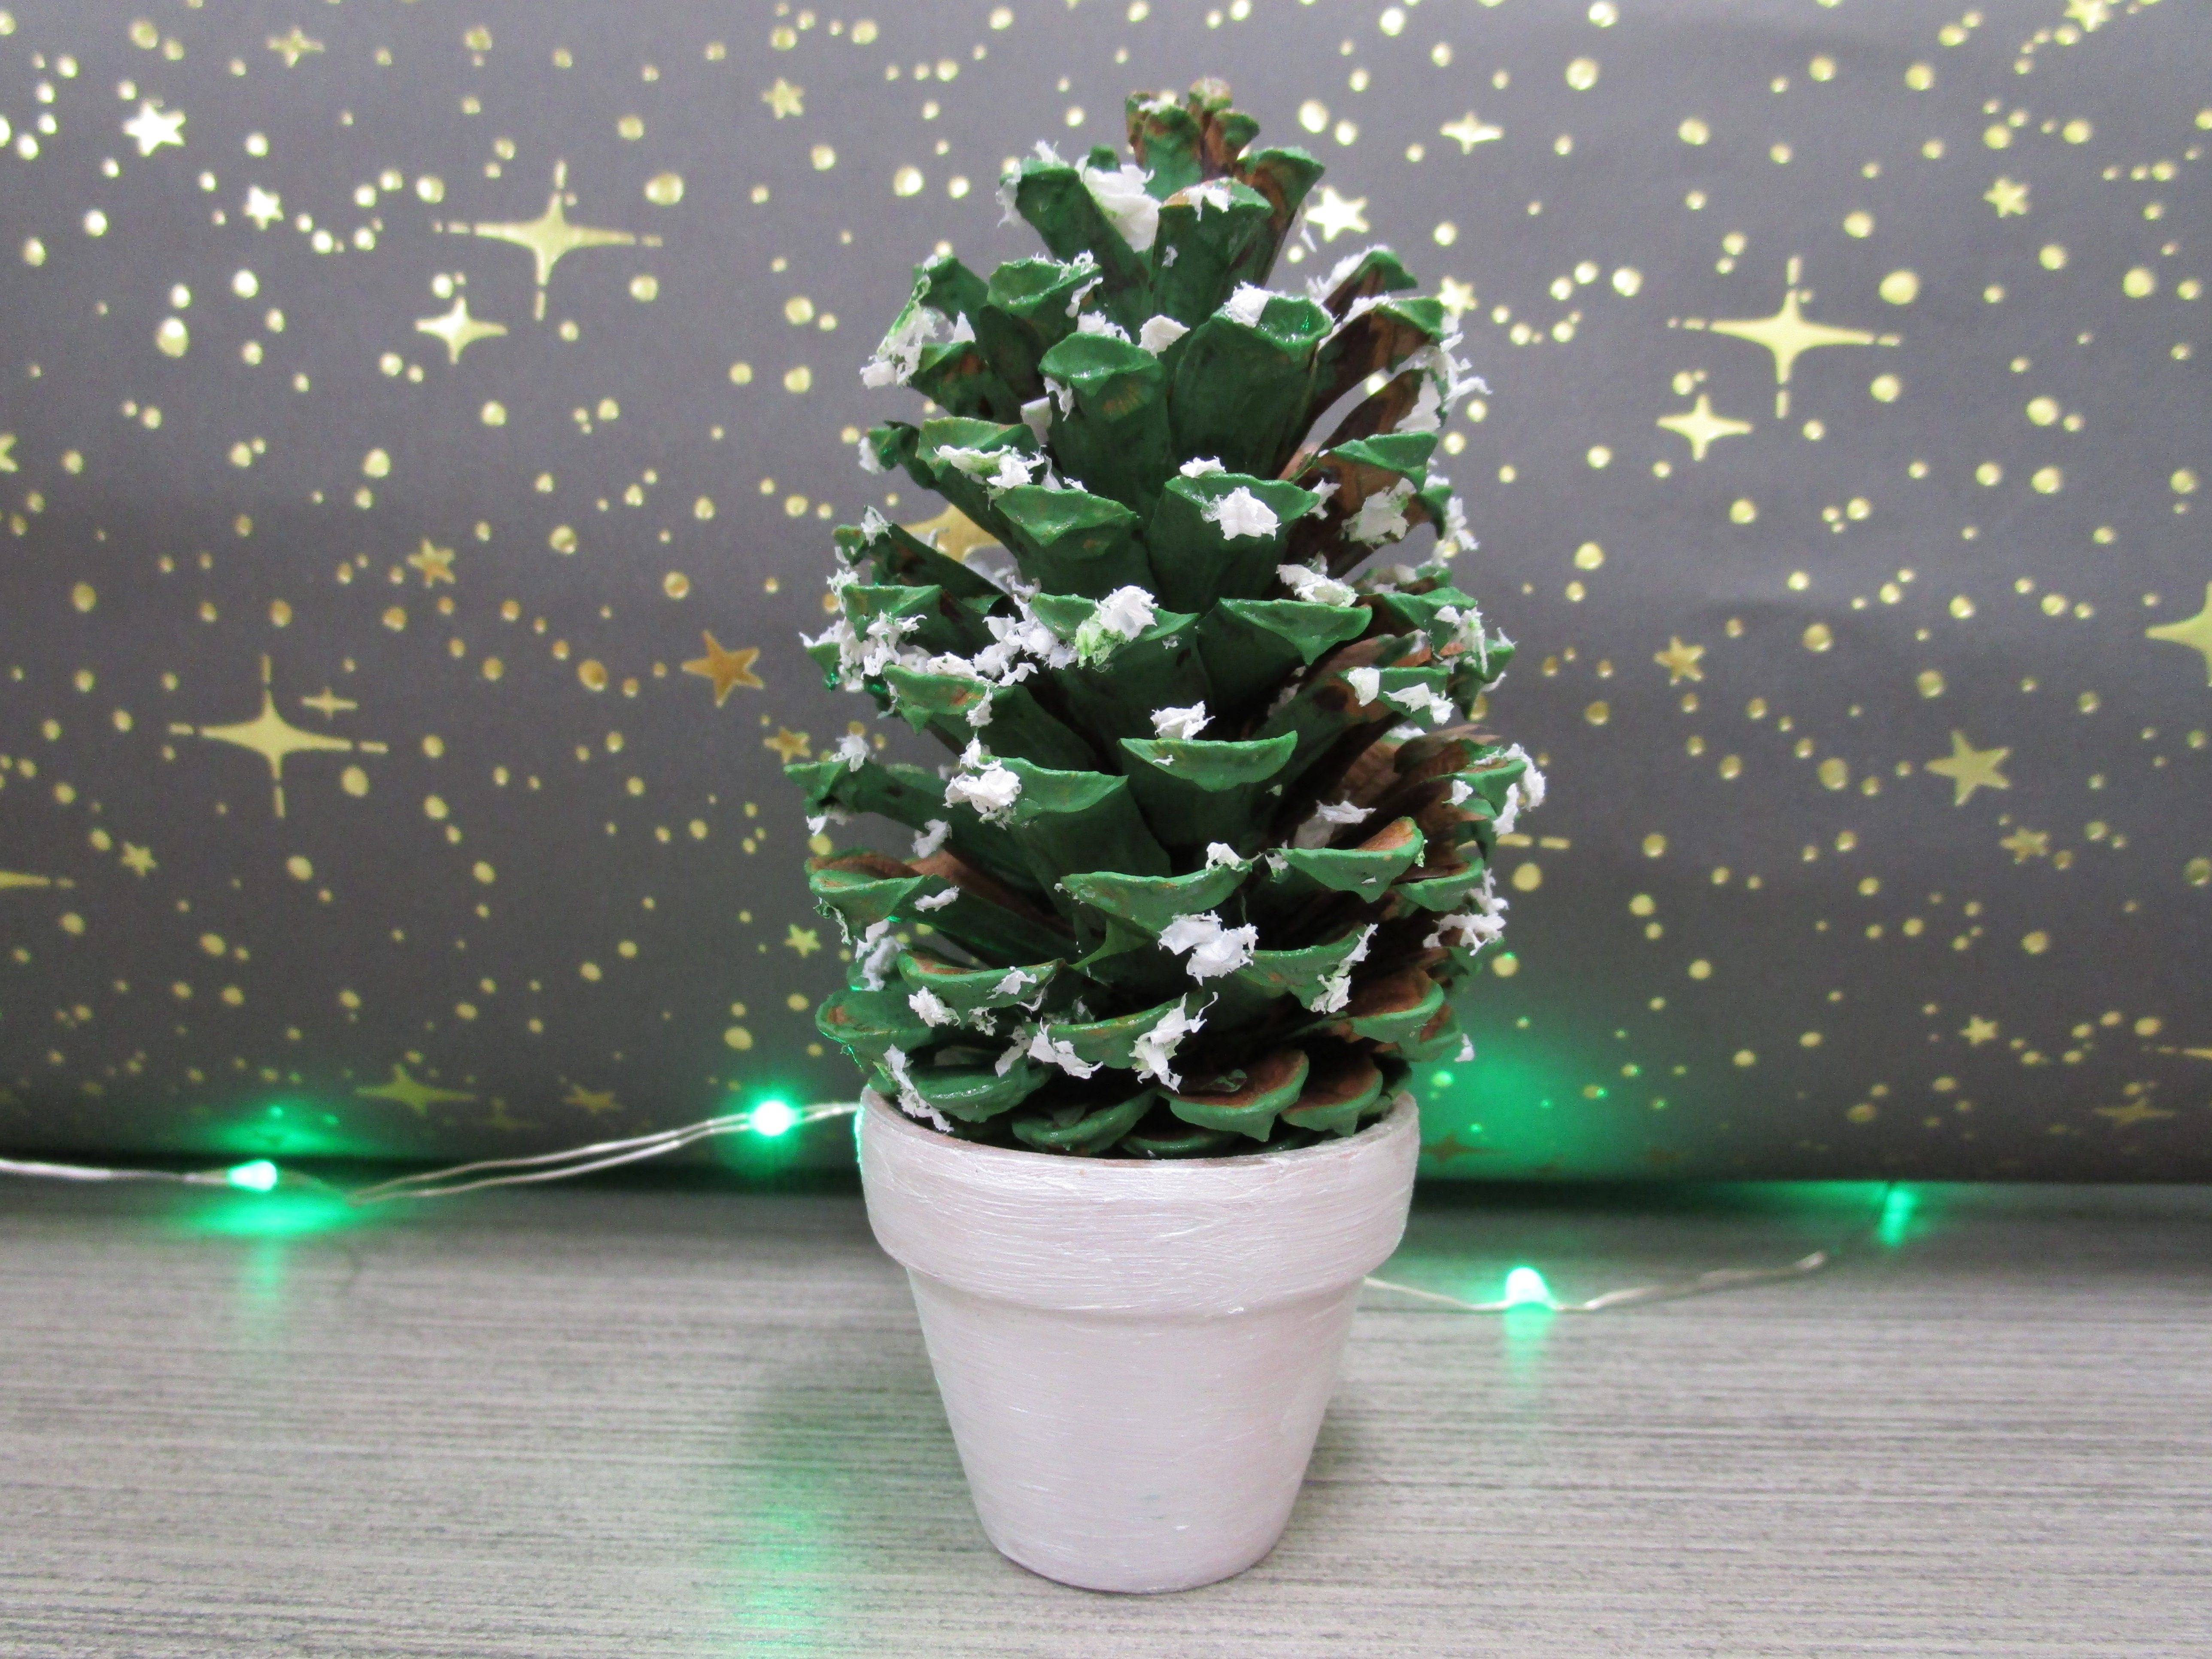 Pinecone painted green in a silver pot with paper snow glued on it